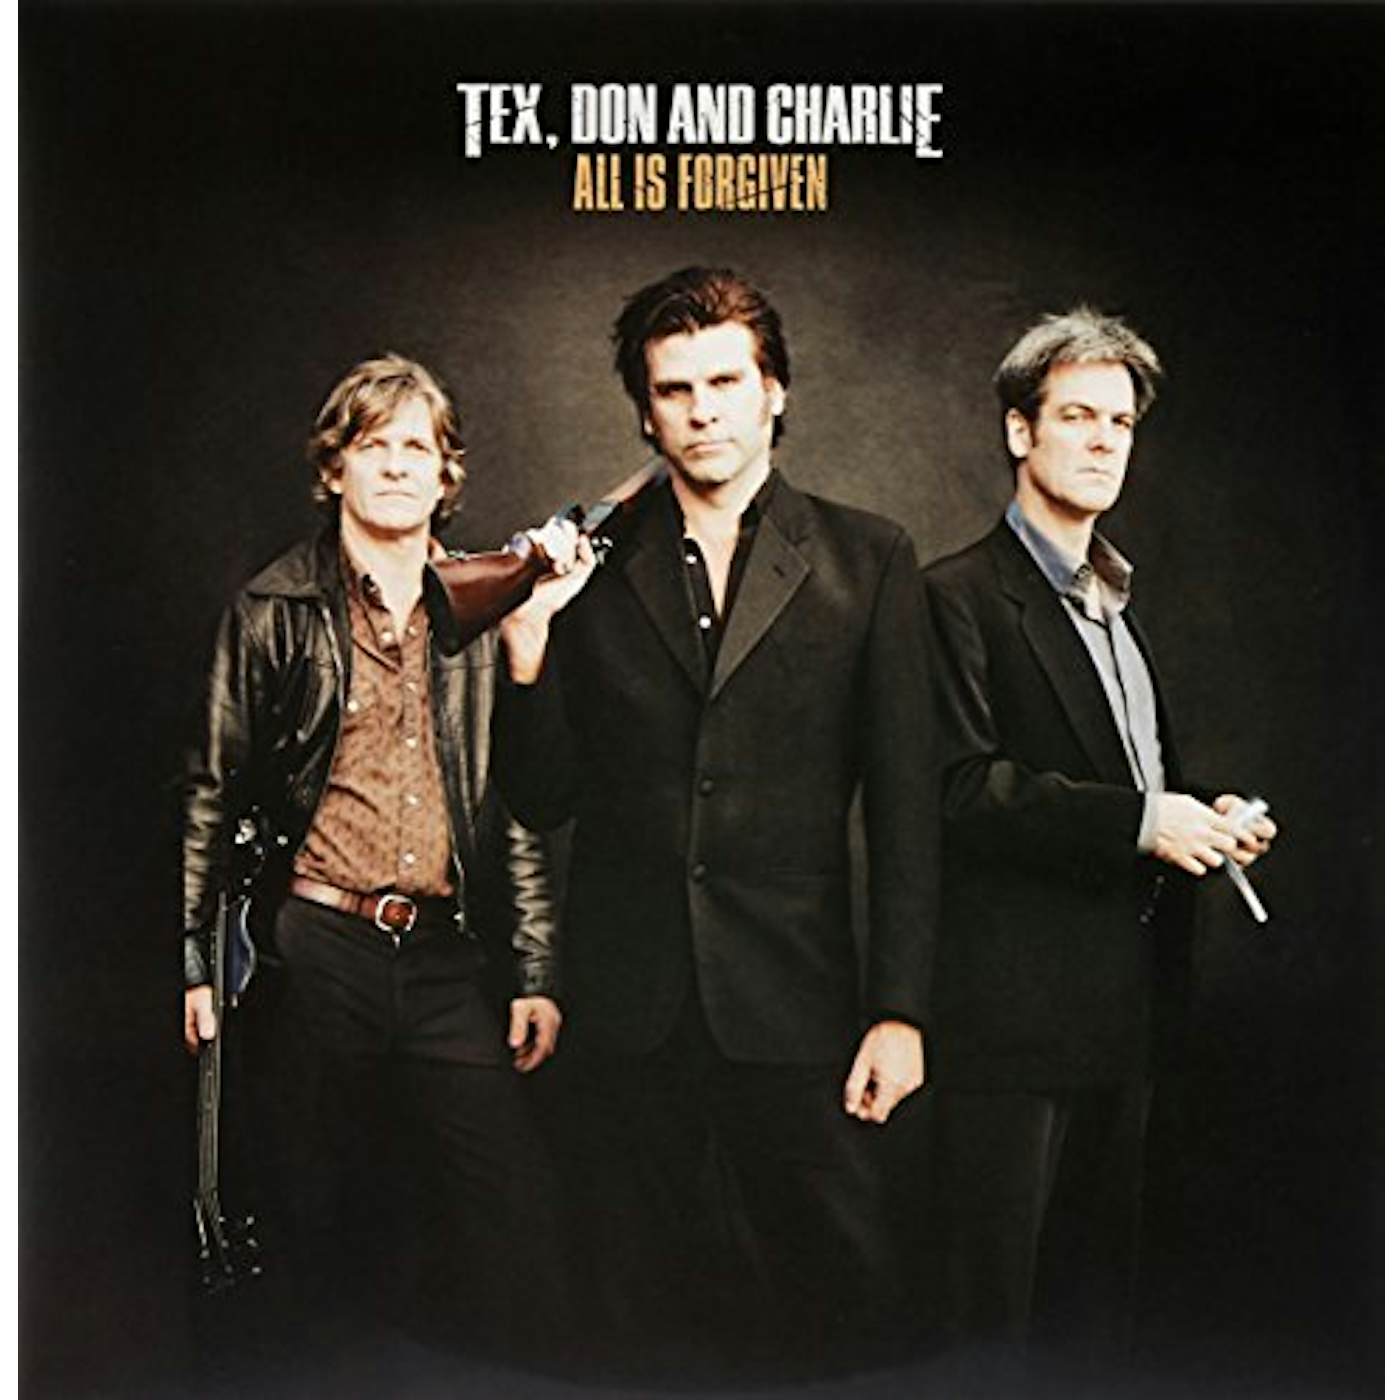 Tex, Don & Charlie All Is Forgiven Vinyl Record